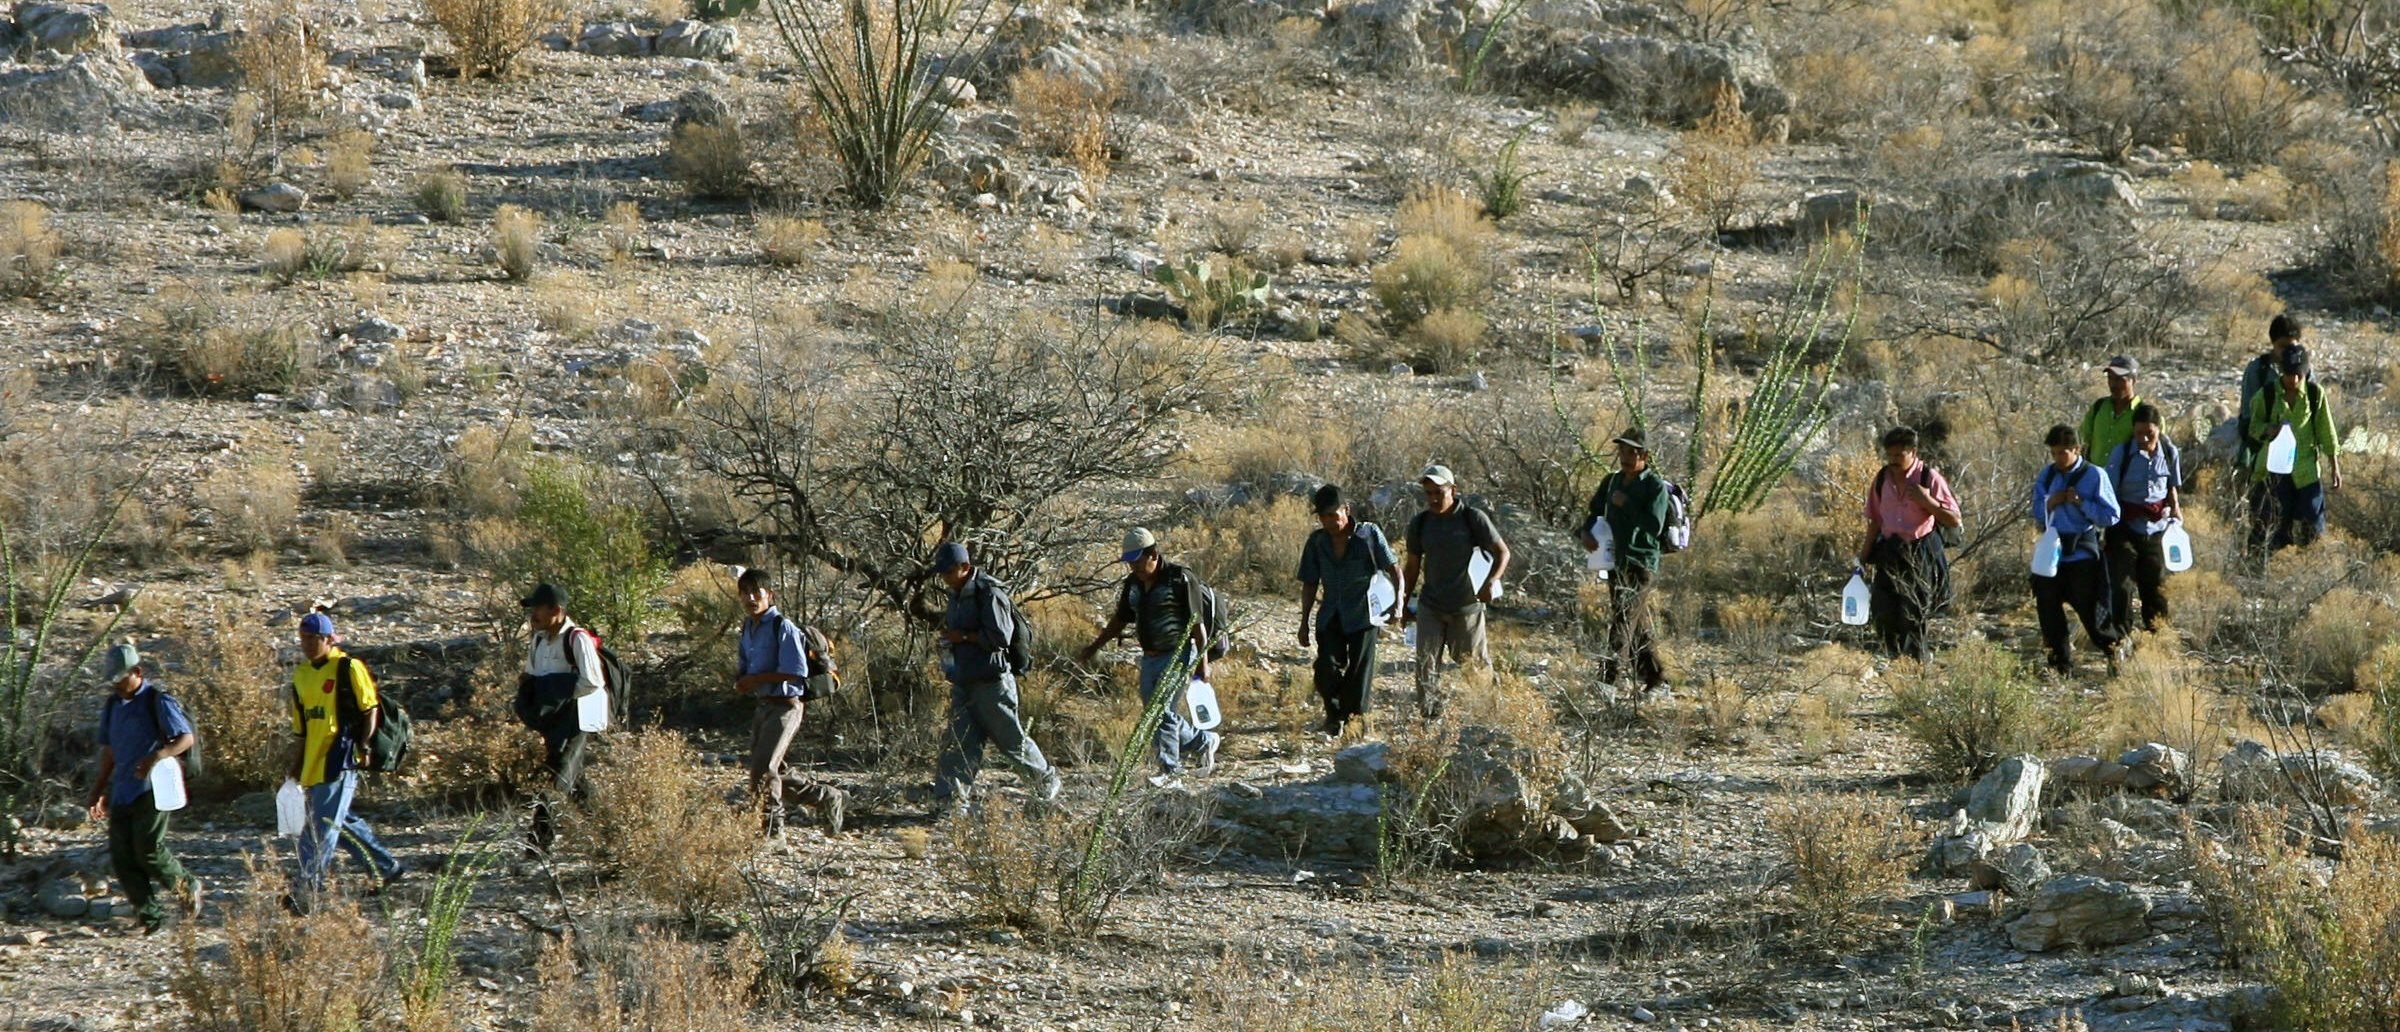 Mexican immigrants walk in line through the Arizona desert near Sasabe, Sonora state, in an attempt to illegally cross the Mexican-US border, 06 April 2006. While thousands of mexicans try to cross the border daily from Sasabe city, the US Senate reached a breakthrough agreement on a legislation that would grant legal residency status to millions of undocumented workers in the United States. AFP PHOTO/ Omar TORRES